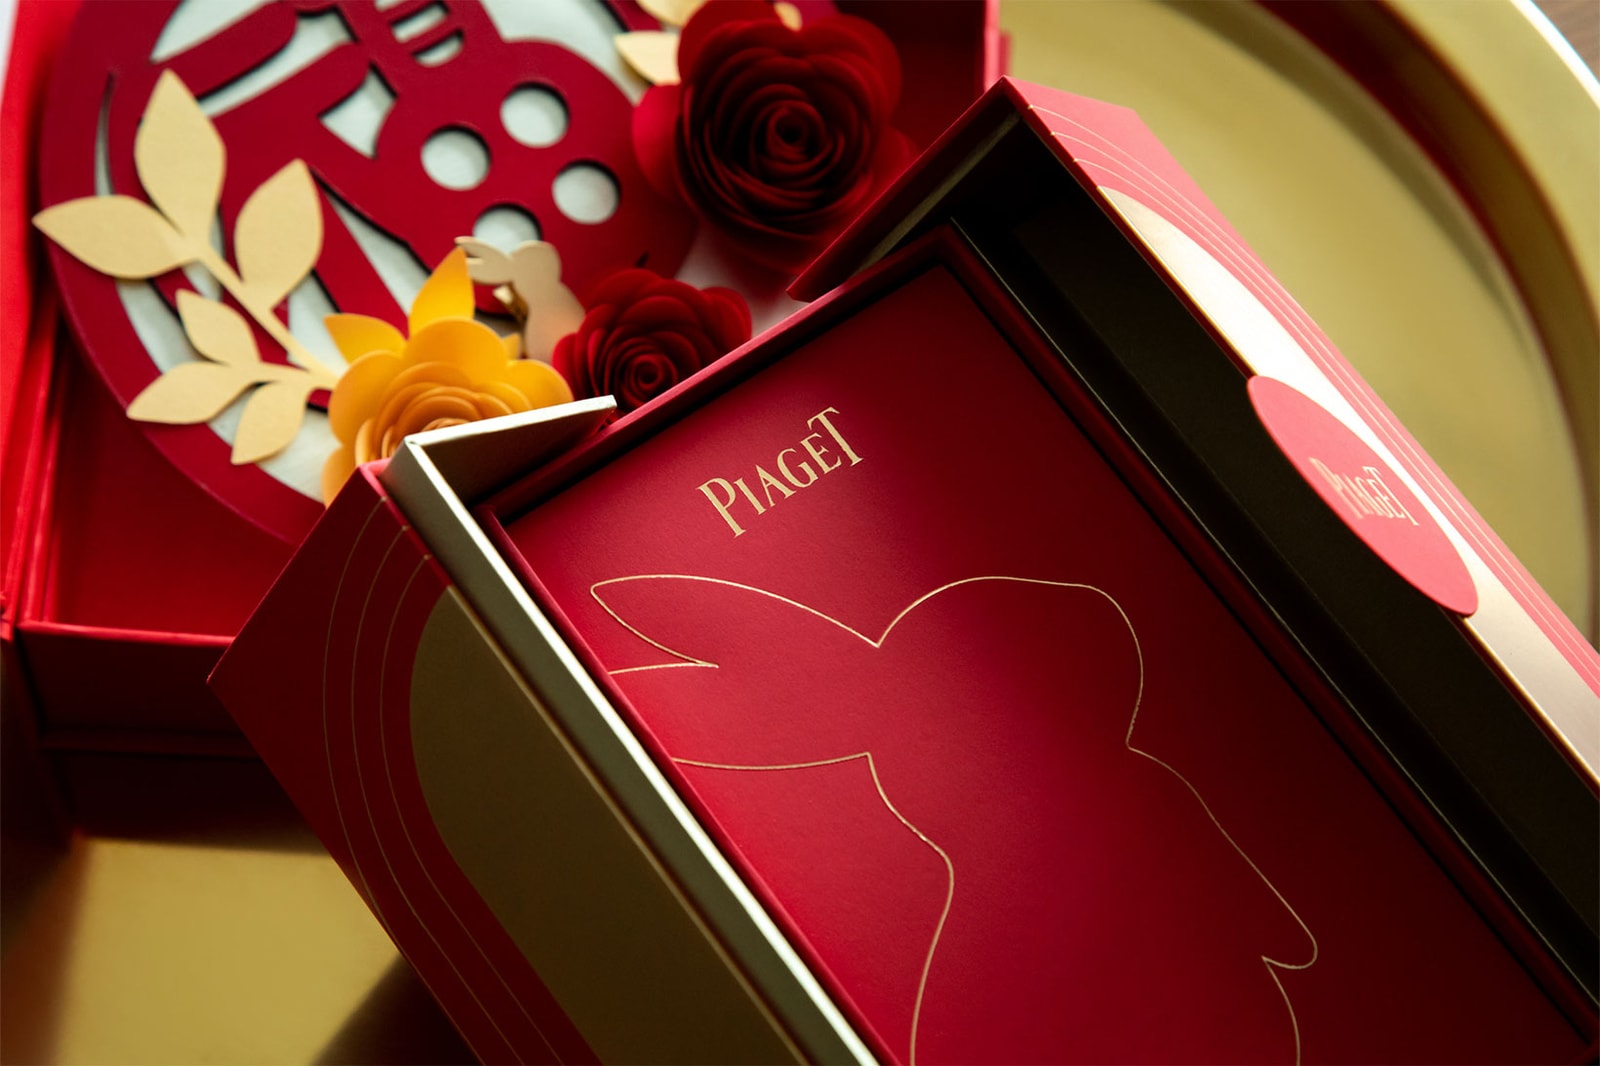 Lunar New Year of the Rabbit Best Red Pockets Envelopes Hong Bao Lai See Hermes Gucci Fendi 